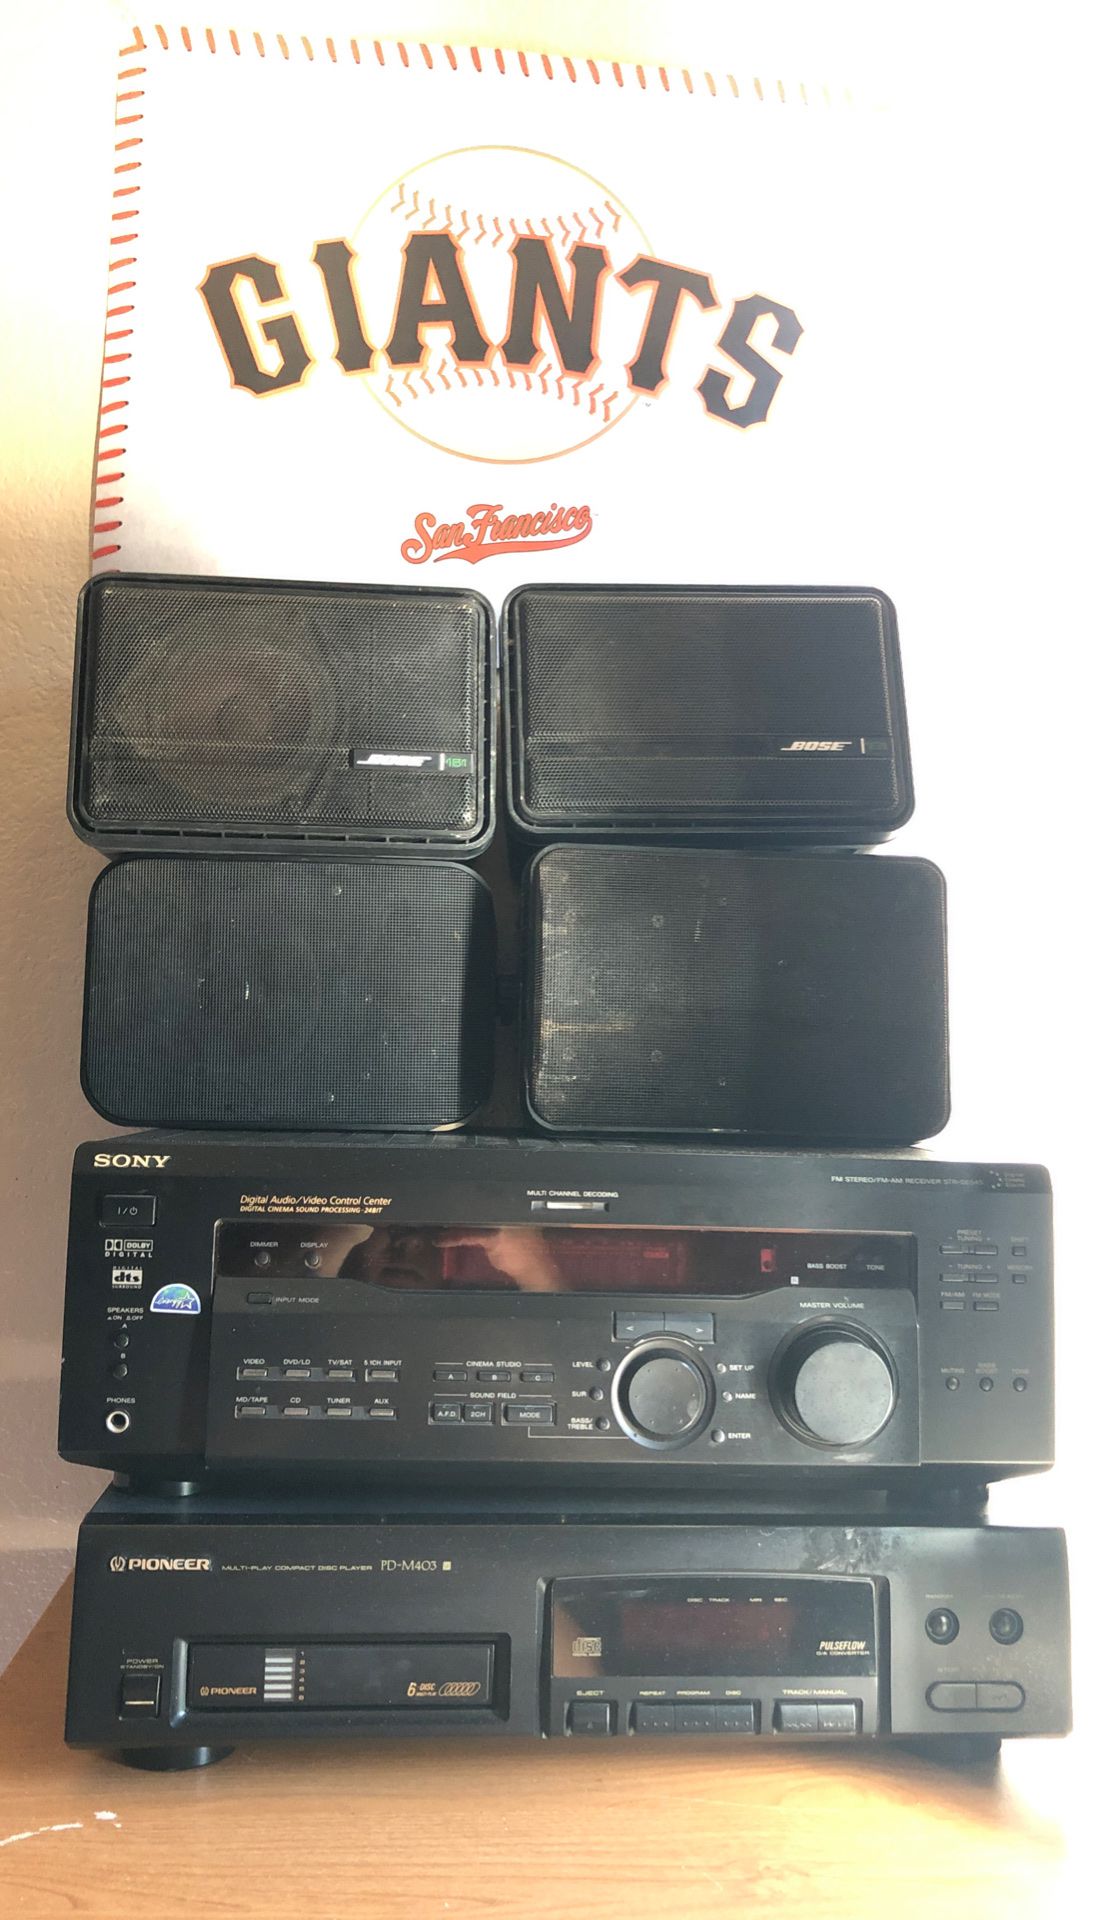 Sony Receiver and pioneer multi disc changer w/ Bose speakers